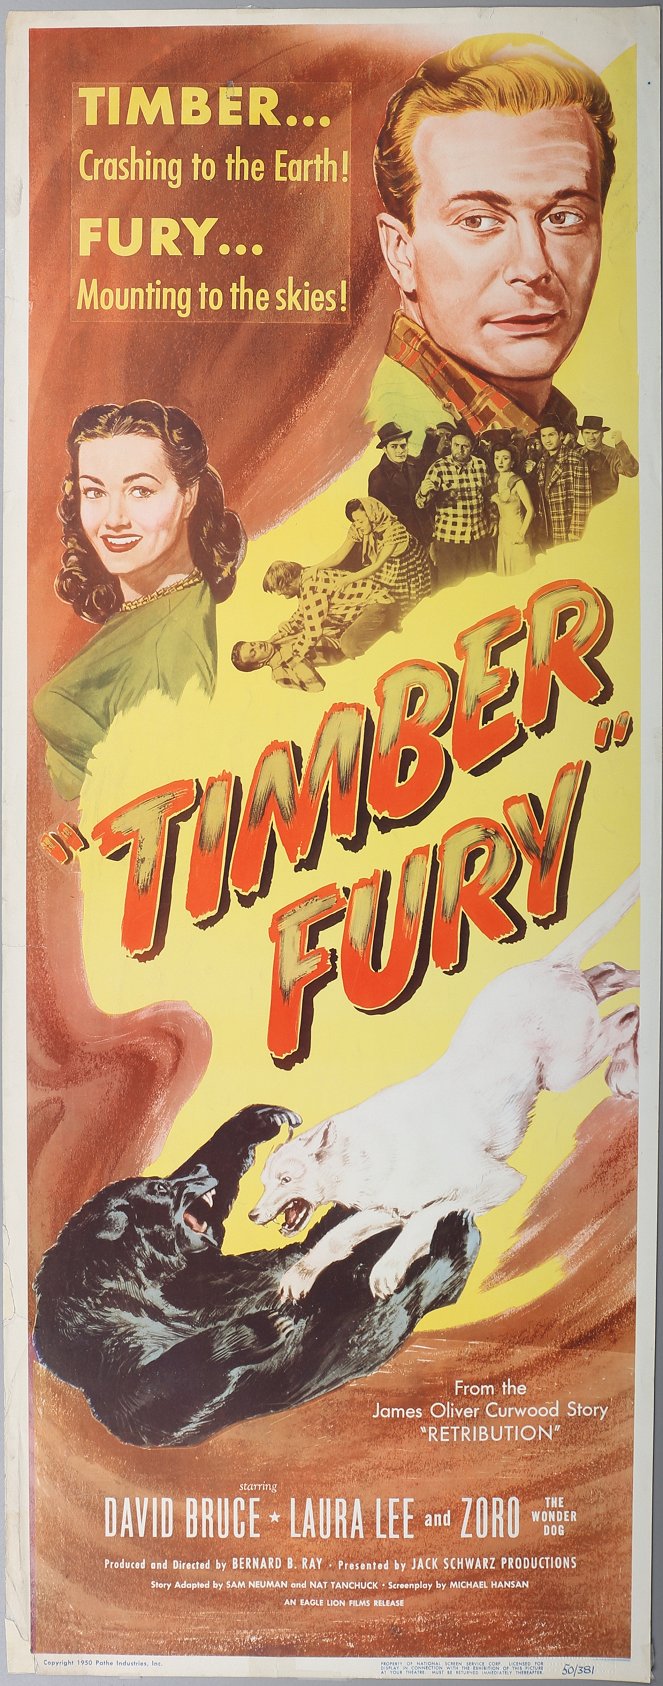 Timber Fury - Posters